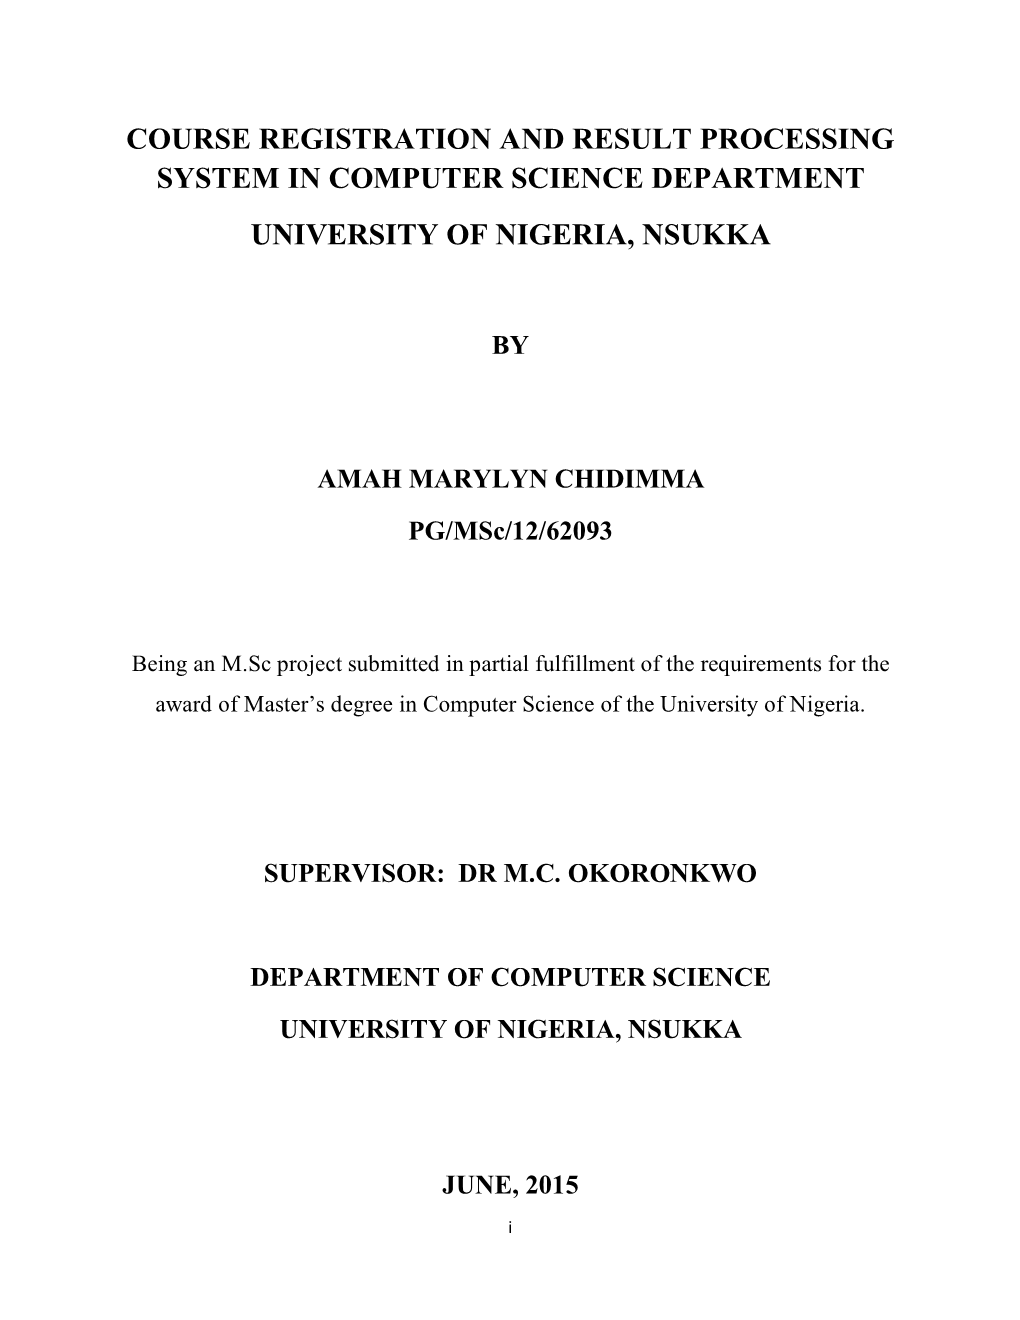 Course Registration and Result Processing System in Computer Science Department University of Nigeria, Nsukka